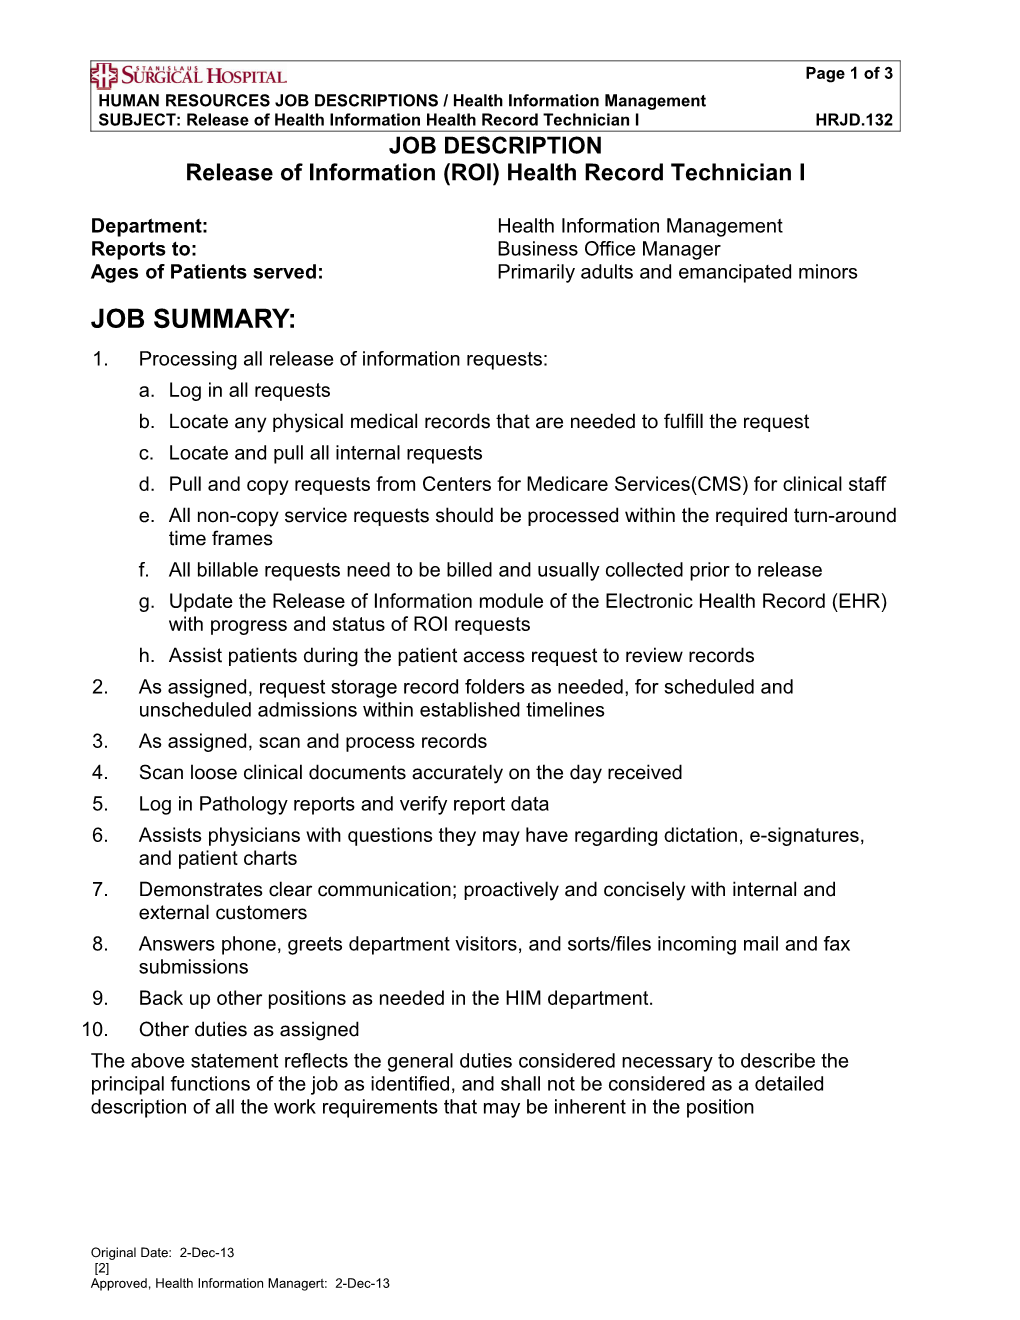 HRJD.132 Release of Information (ROI) Health Record Technician I